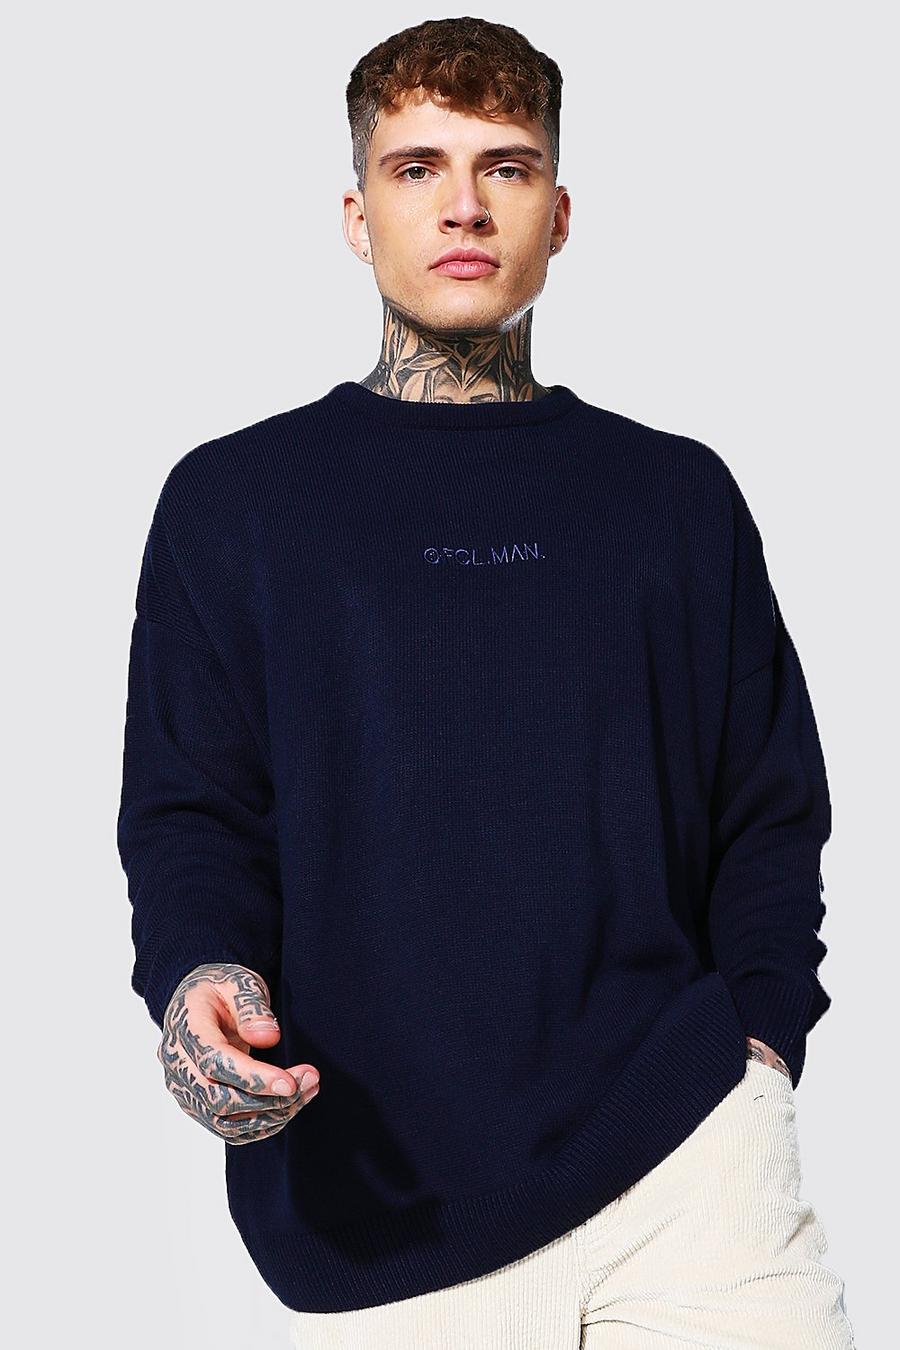 Navy Oversized Ofcl Man Tonal Embroidered Jumper image number 1